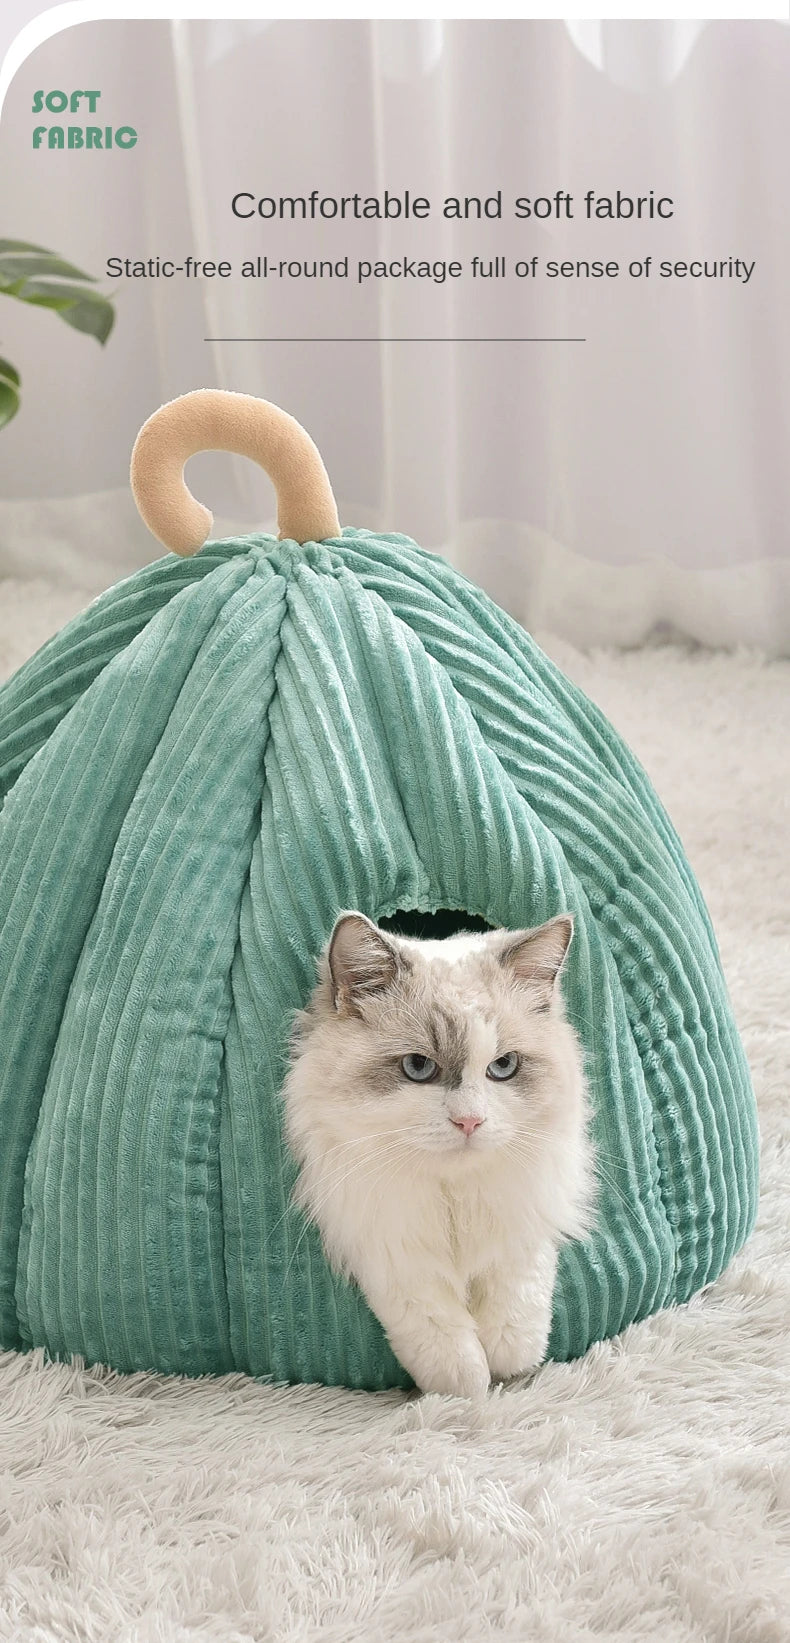 Pets Pumkin Style Warm House for Cat - Cat Hideout Beds - The GoatFind Gray / L40xW40xH38CM, Gray / L50xW50xH40CM, Green / L40xW40xH38CM, Green / L50xW50xH40CM, 2024-Green / L40xW40xH38CM, 2024-Green / L50xW50xH40CM, 2024-Orange / L40xW40xH38CM, 2024-Orange / L50xW50xH40CM